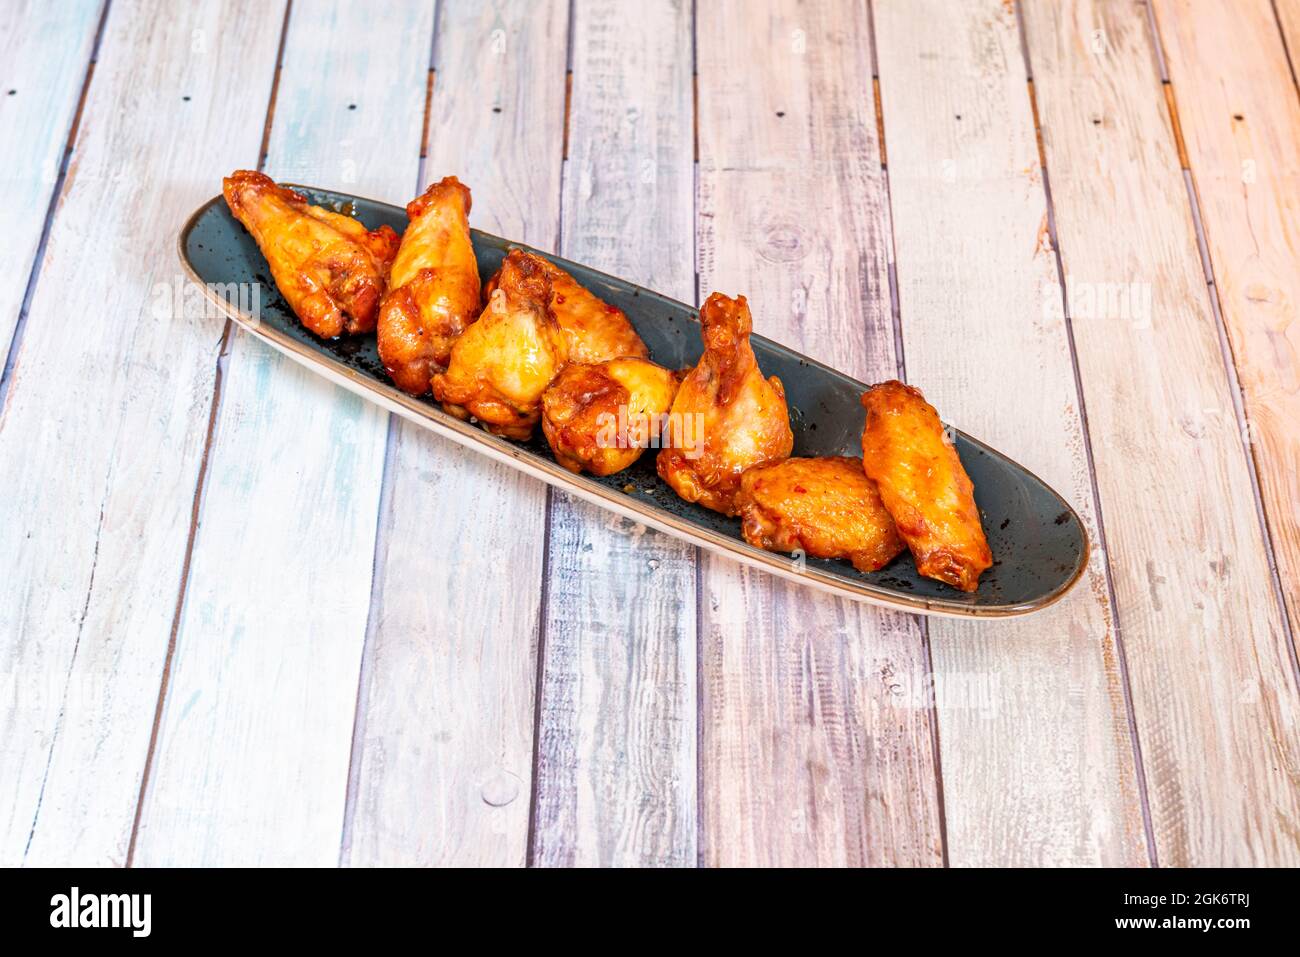 elongated tray with portion of fried chicken wings on the barbecue on wooden table Stock Photo